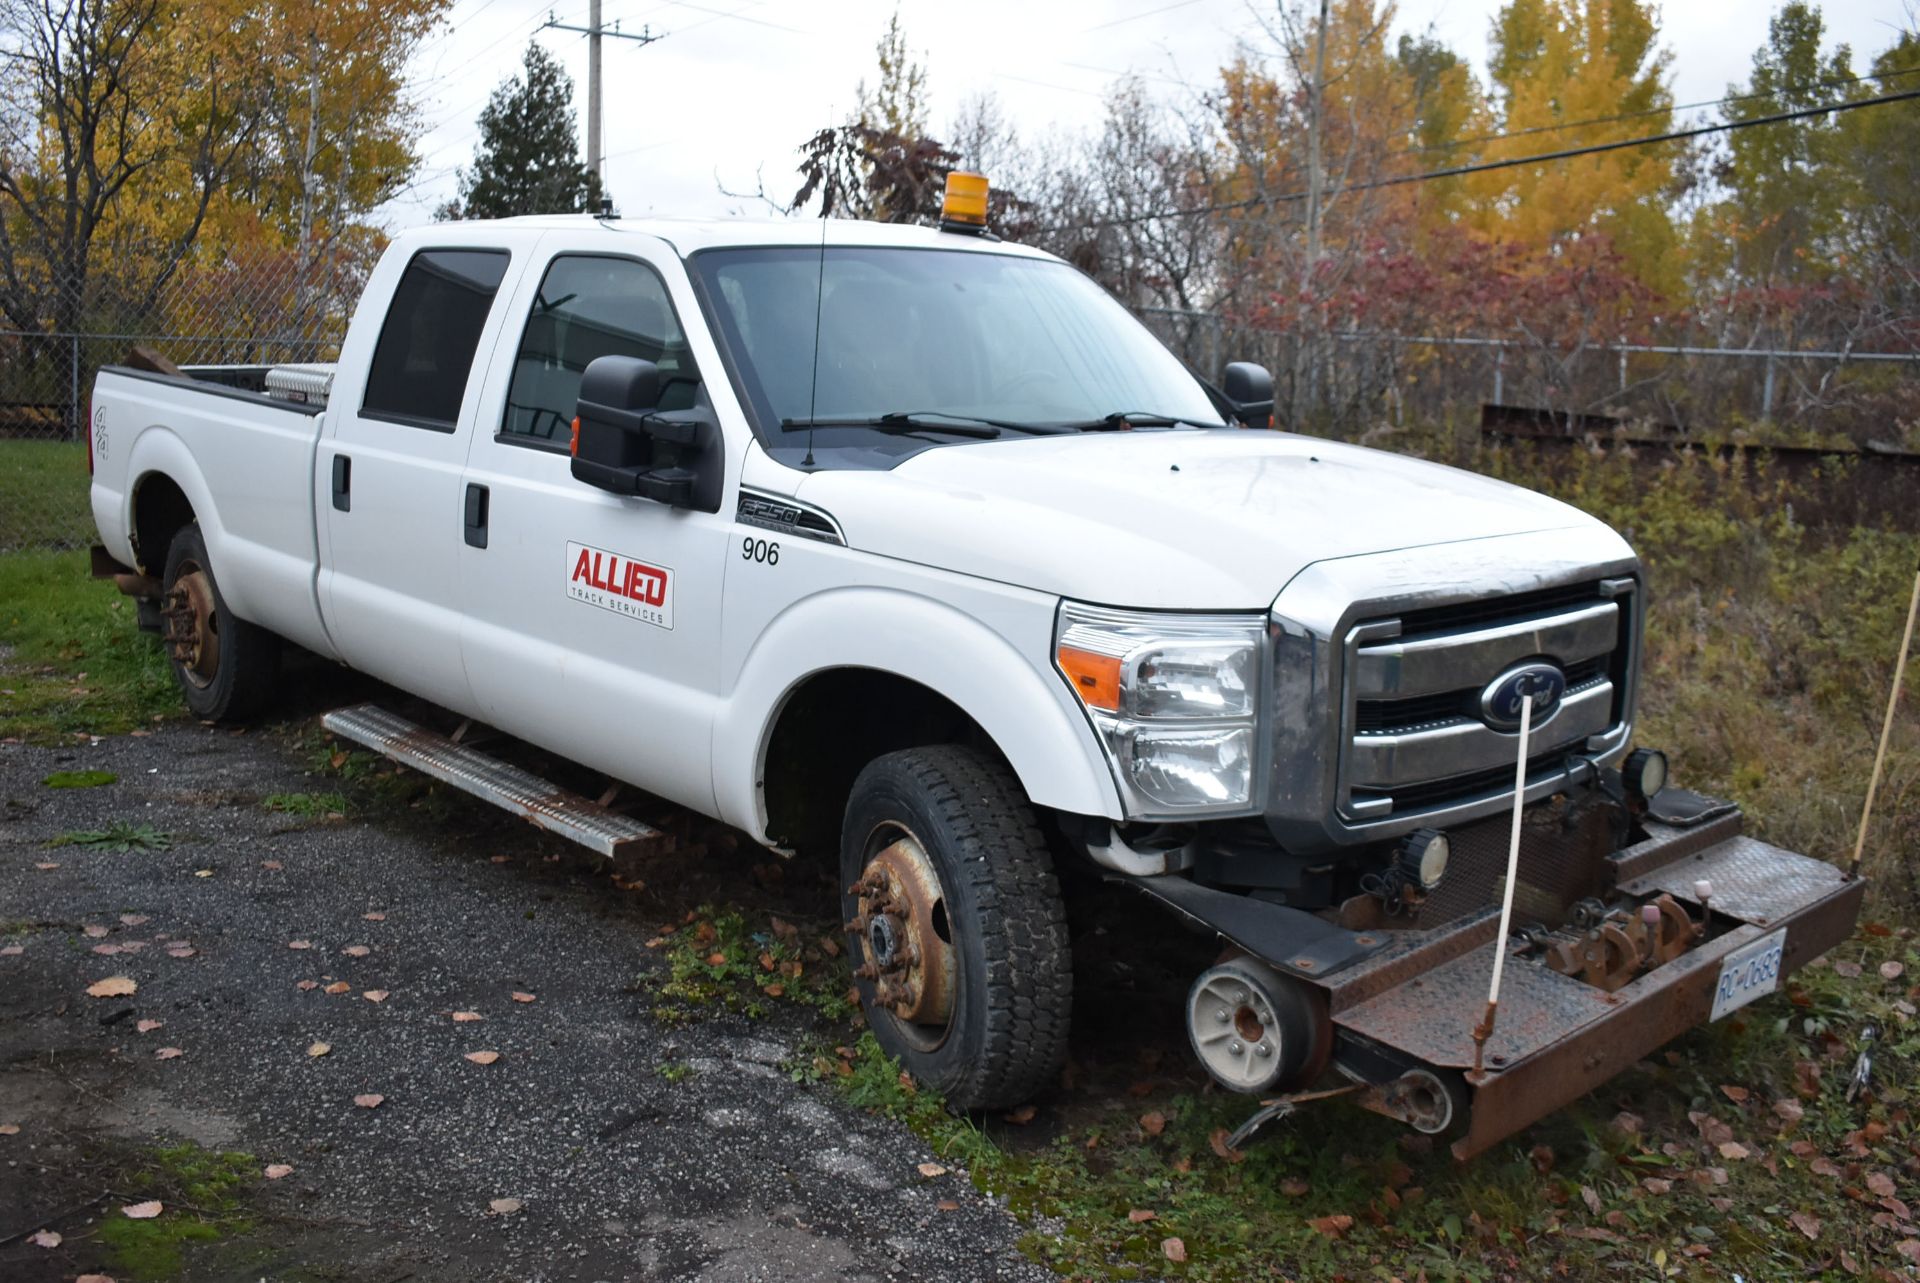 FORD (2012) F-250 XLT CREW CAB PICKUP TRUCK WITH 6.2 L V8 GAS ENGINE, AUTO TRANSMISSION, 4X4, HI- - Image 2 of 24